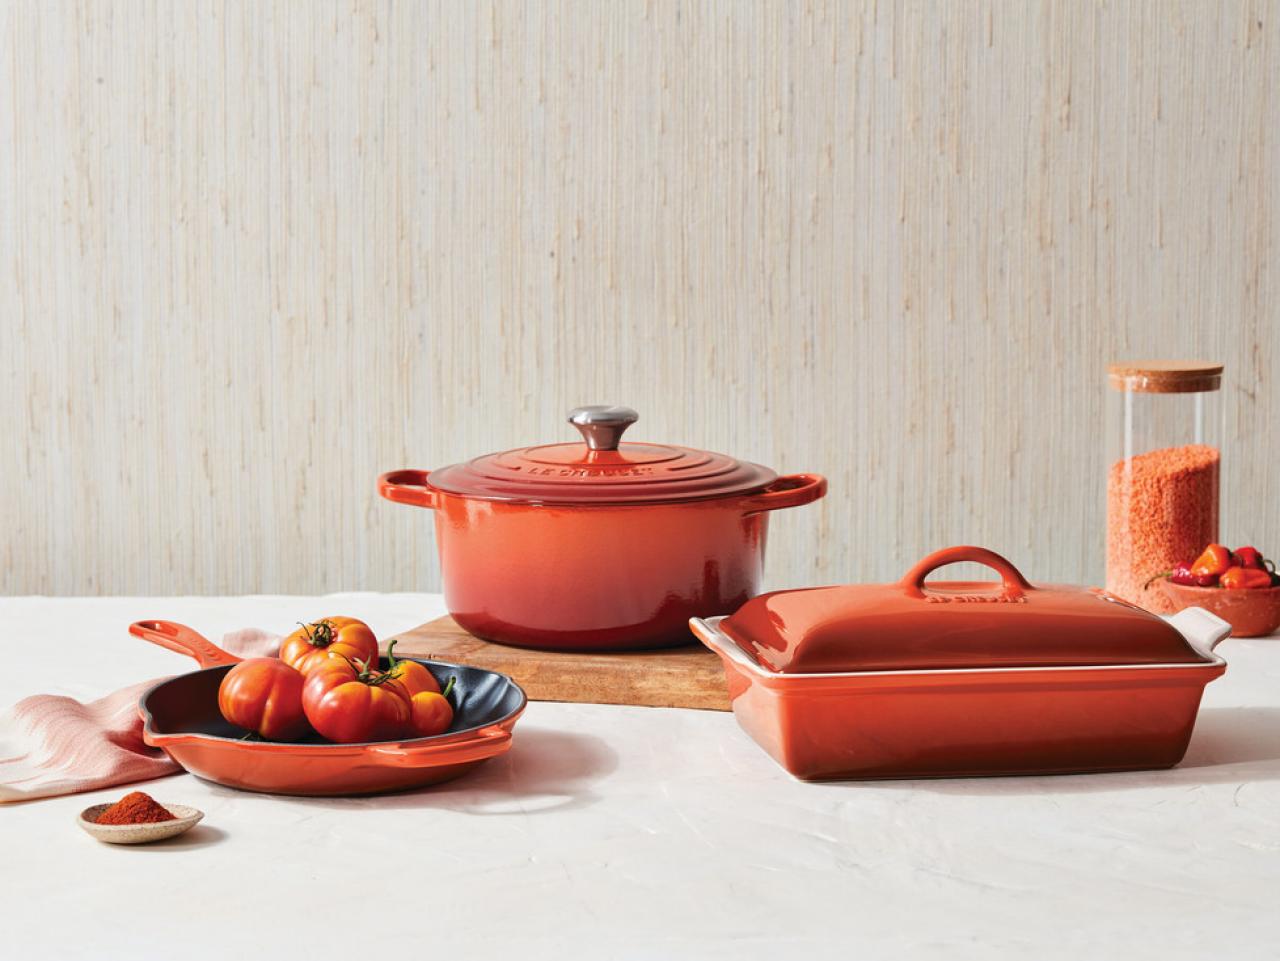 https://food.fnr.sndimg.com/content/dam/images/food/products/2021/7/6/rx_LeCreuset-CayenneGrouping.jpg.rend.hgtvcom.1280.960.suffix/1625585428695.jpeg